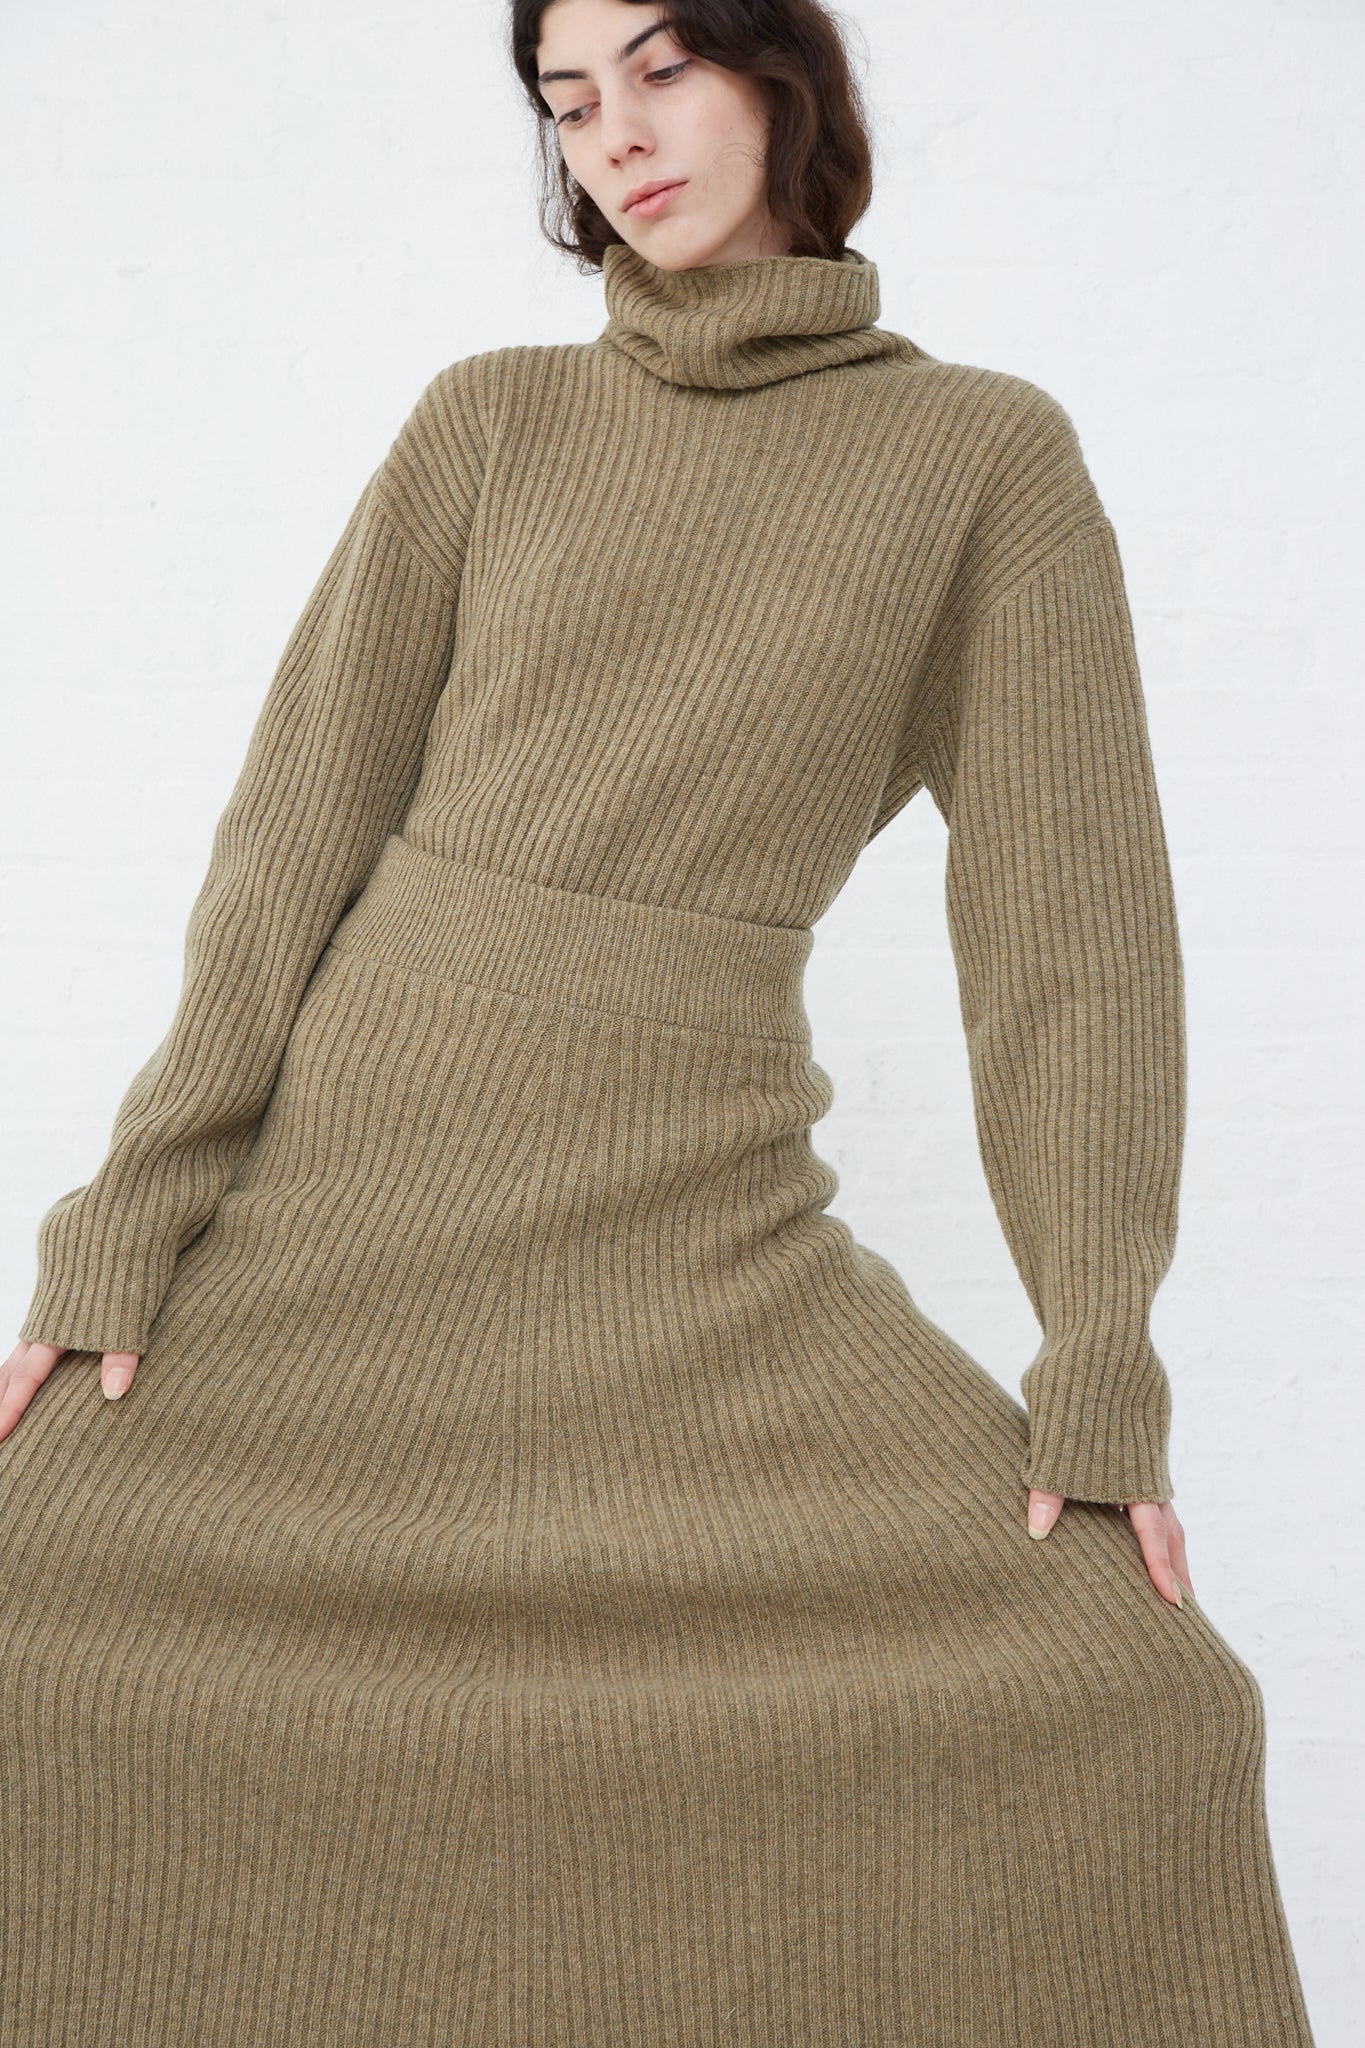 A woman wearing an Ichi Antiquités ribbed knit wool turtle neck sweater and midi skirt in mocha.